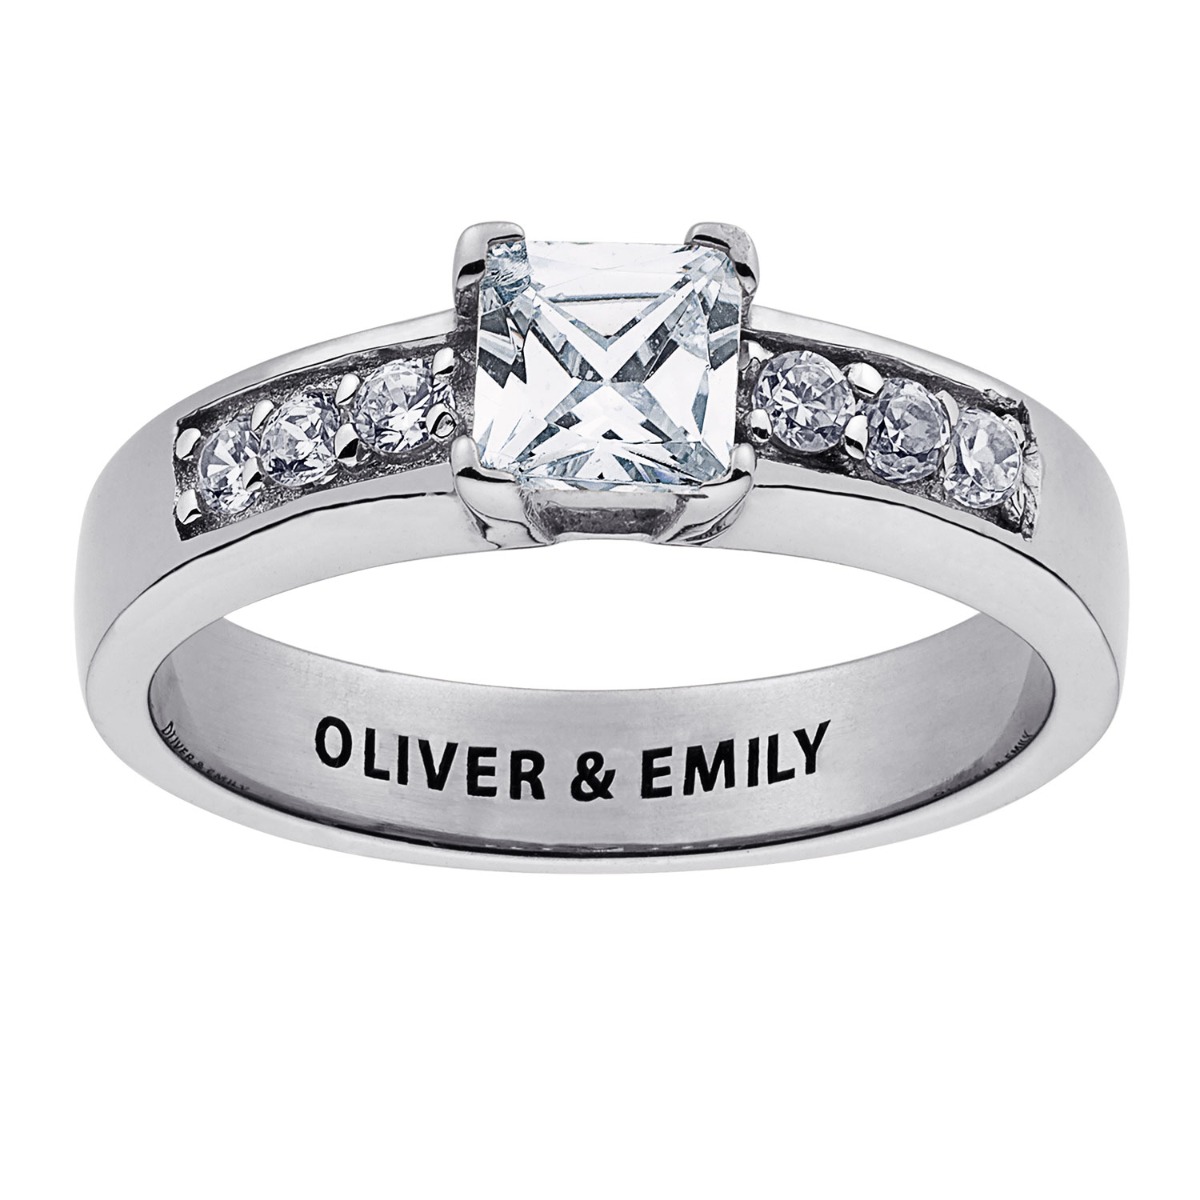 Sterling Silver Square CZ Engraved Wedding Ring